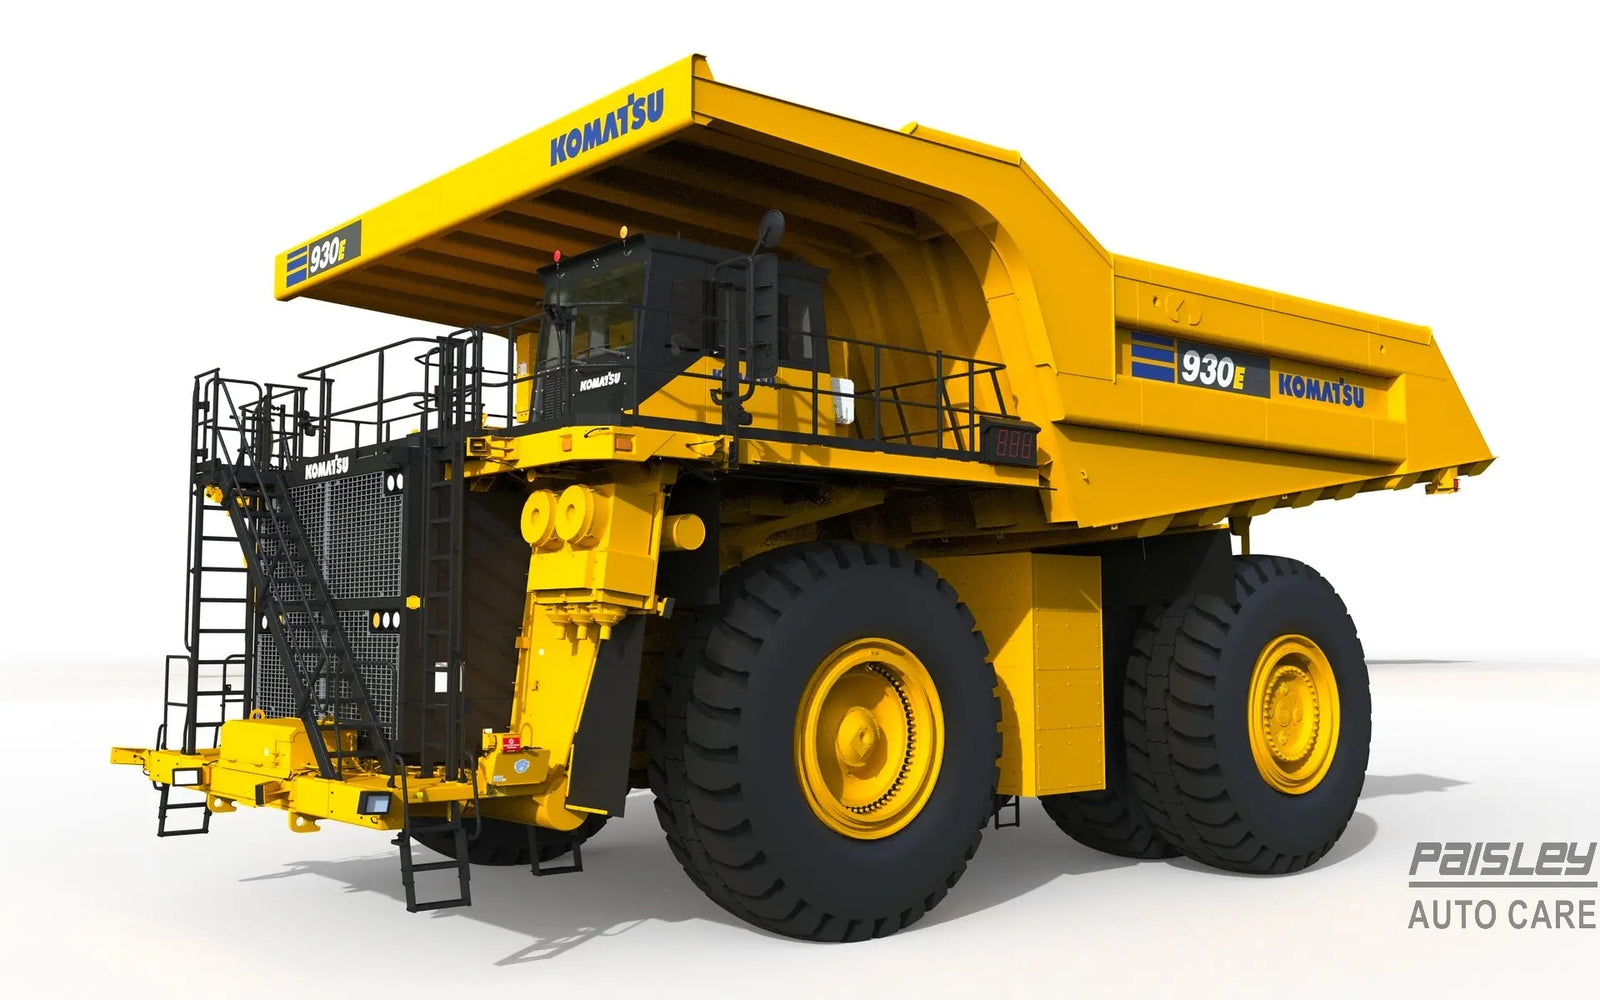 Top 3 Reasons Why GM and Komatsu's Mining Truck is Revolutionary - Paisley Autocare